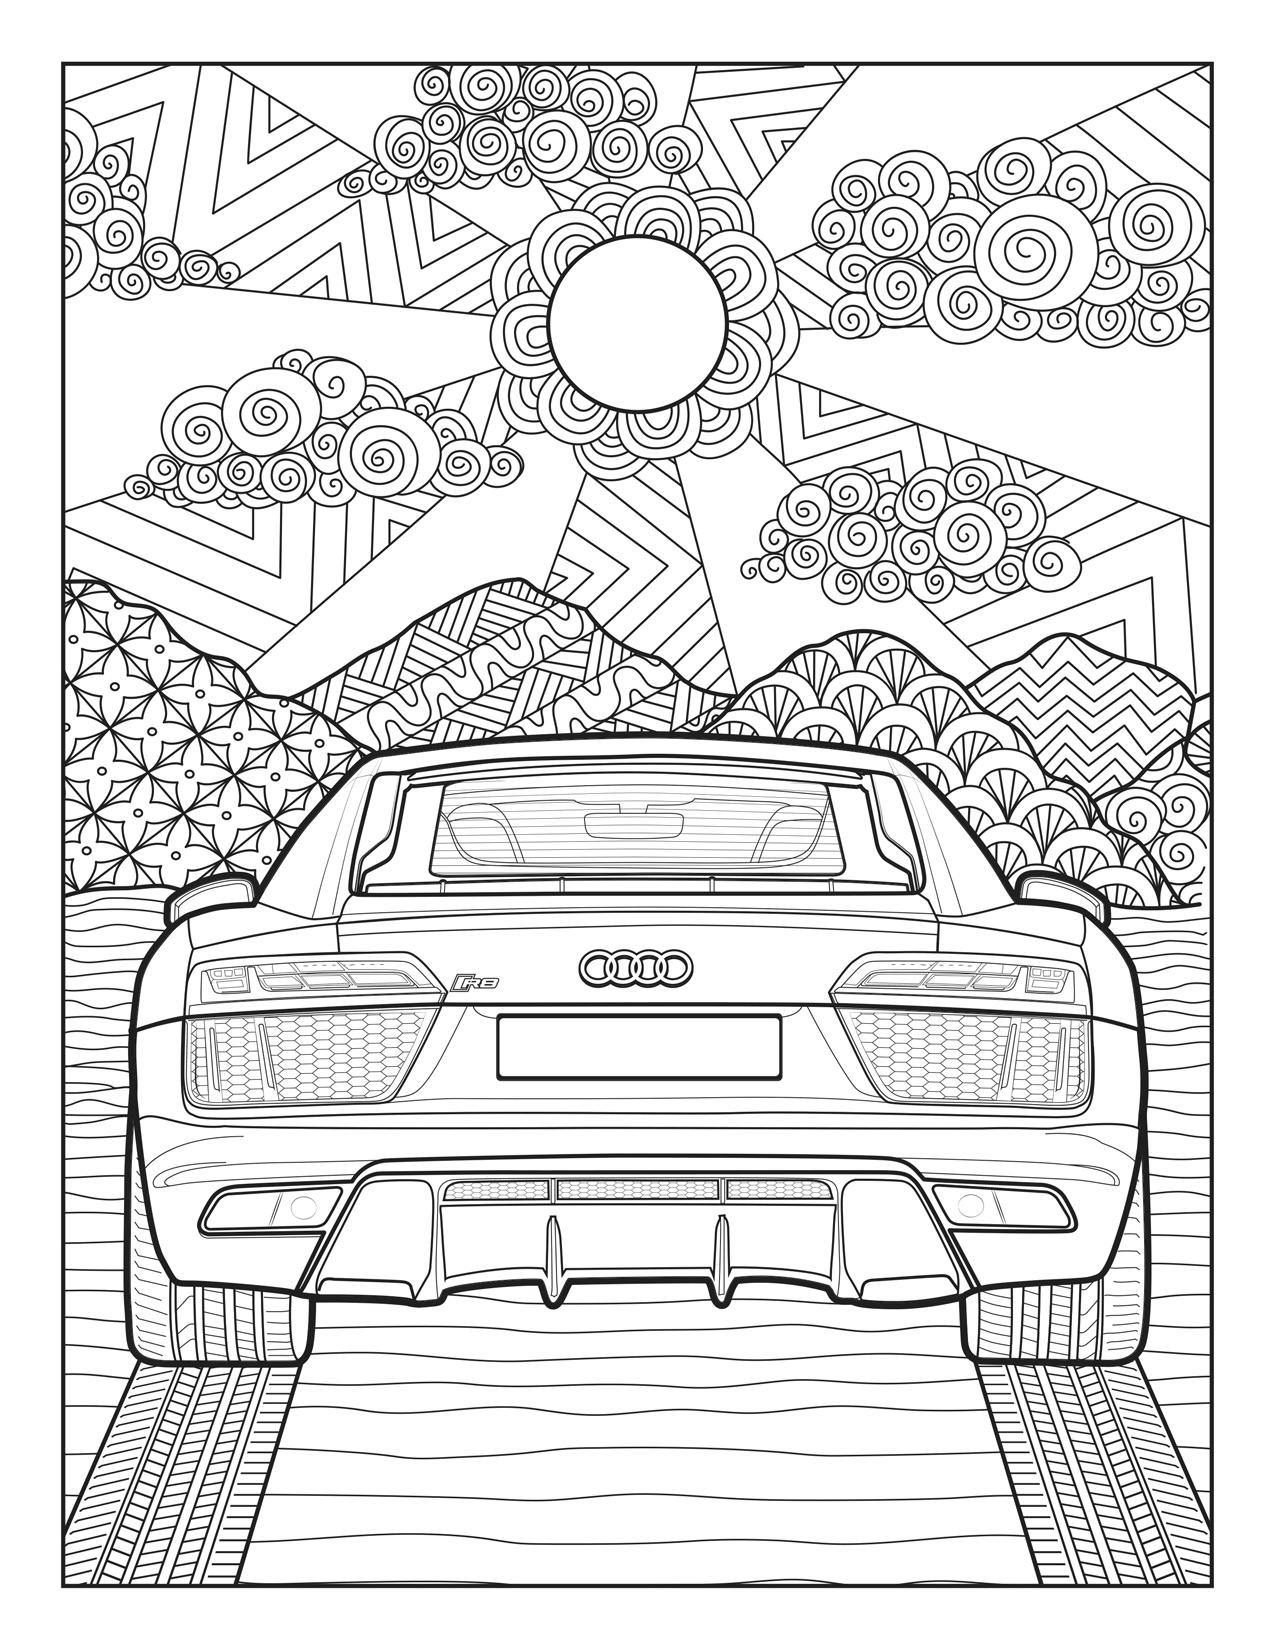 Audi coloring page free download